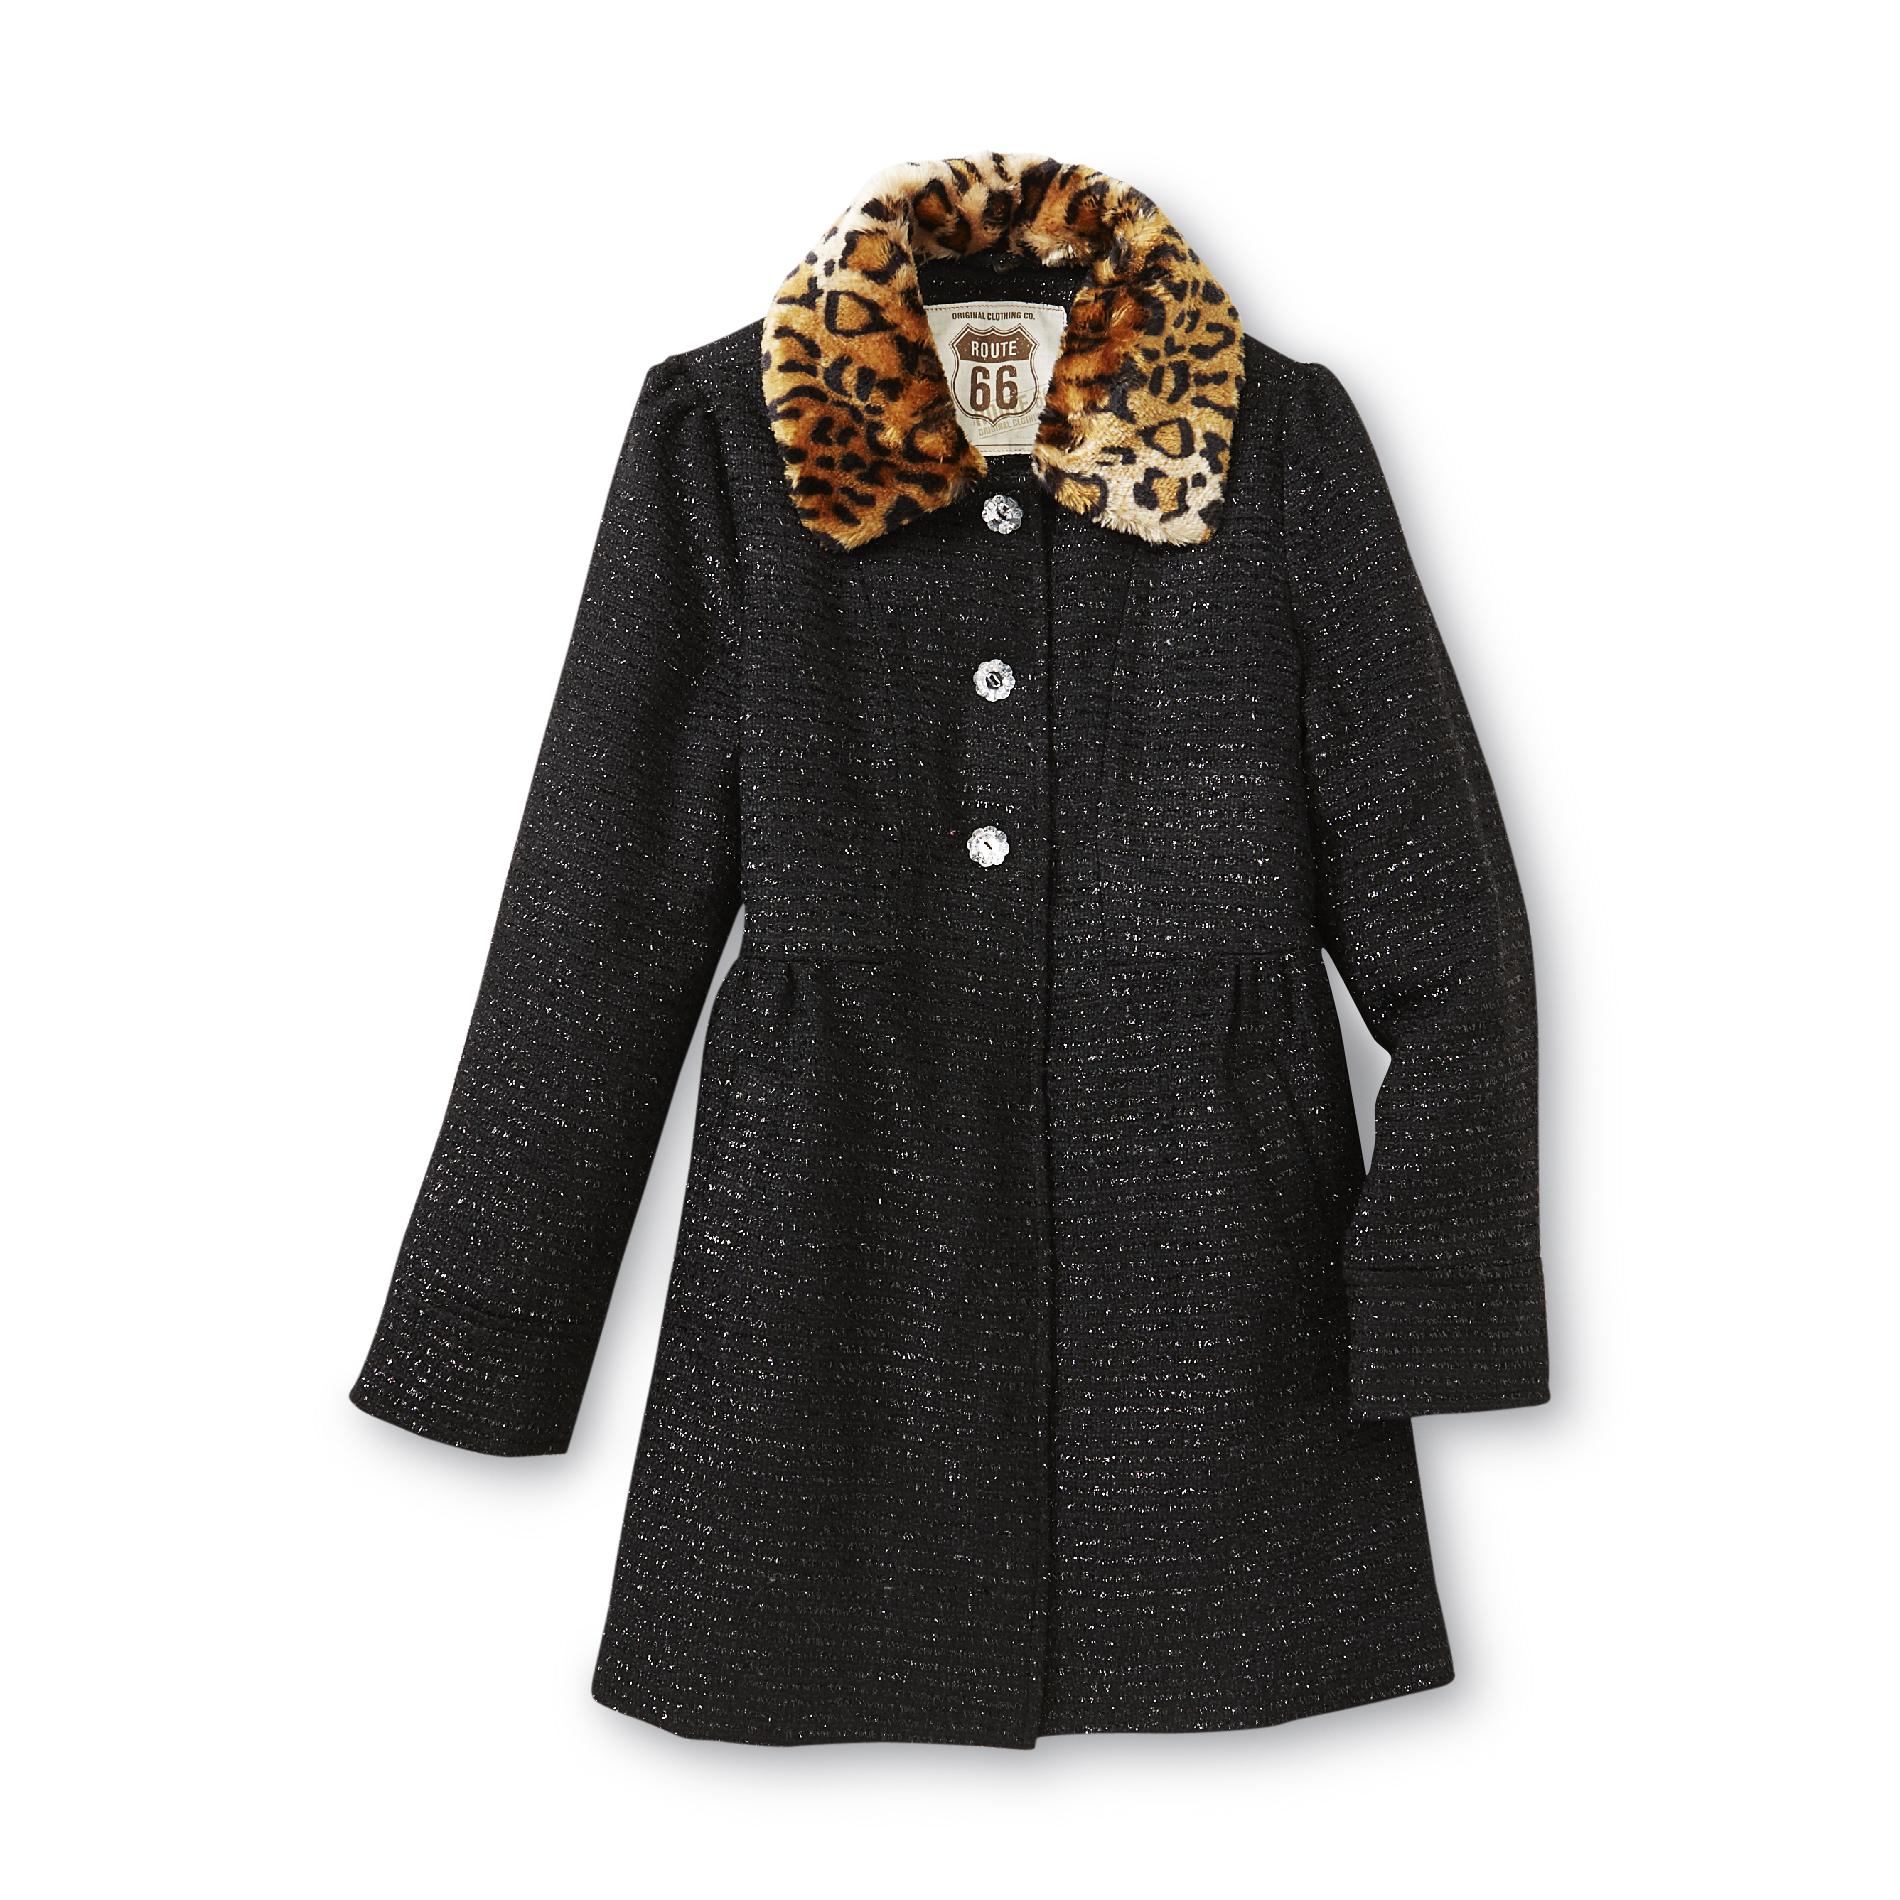 Holiday Editions Girl's Faux Wool Coat - Leopard Print